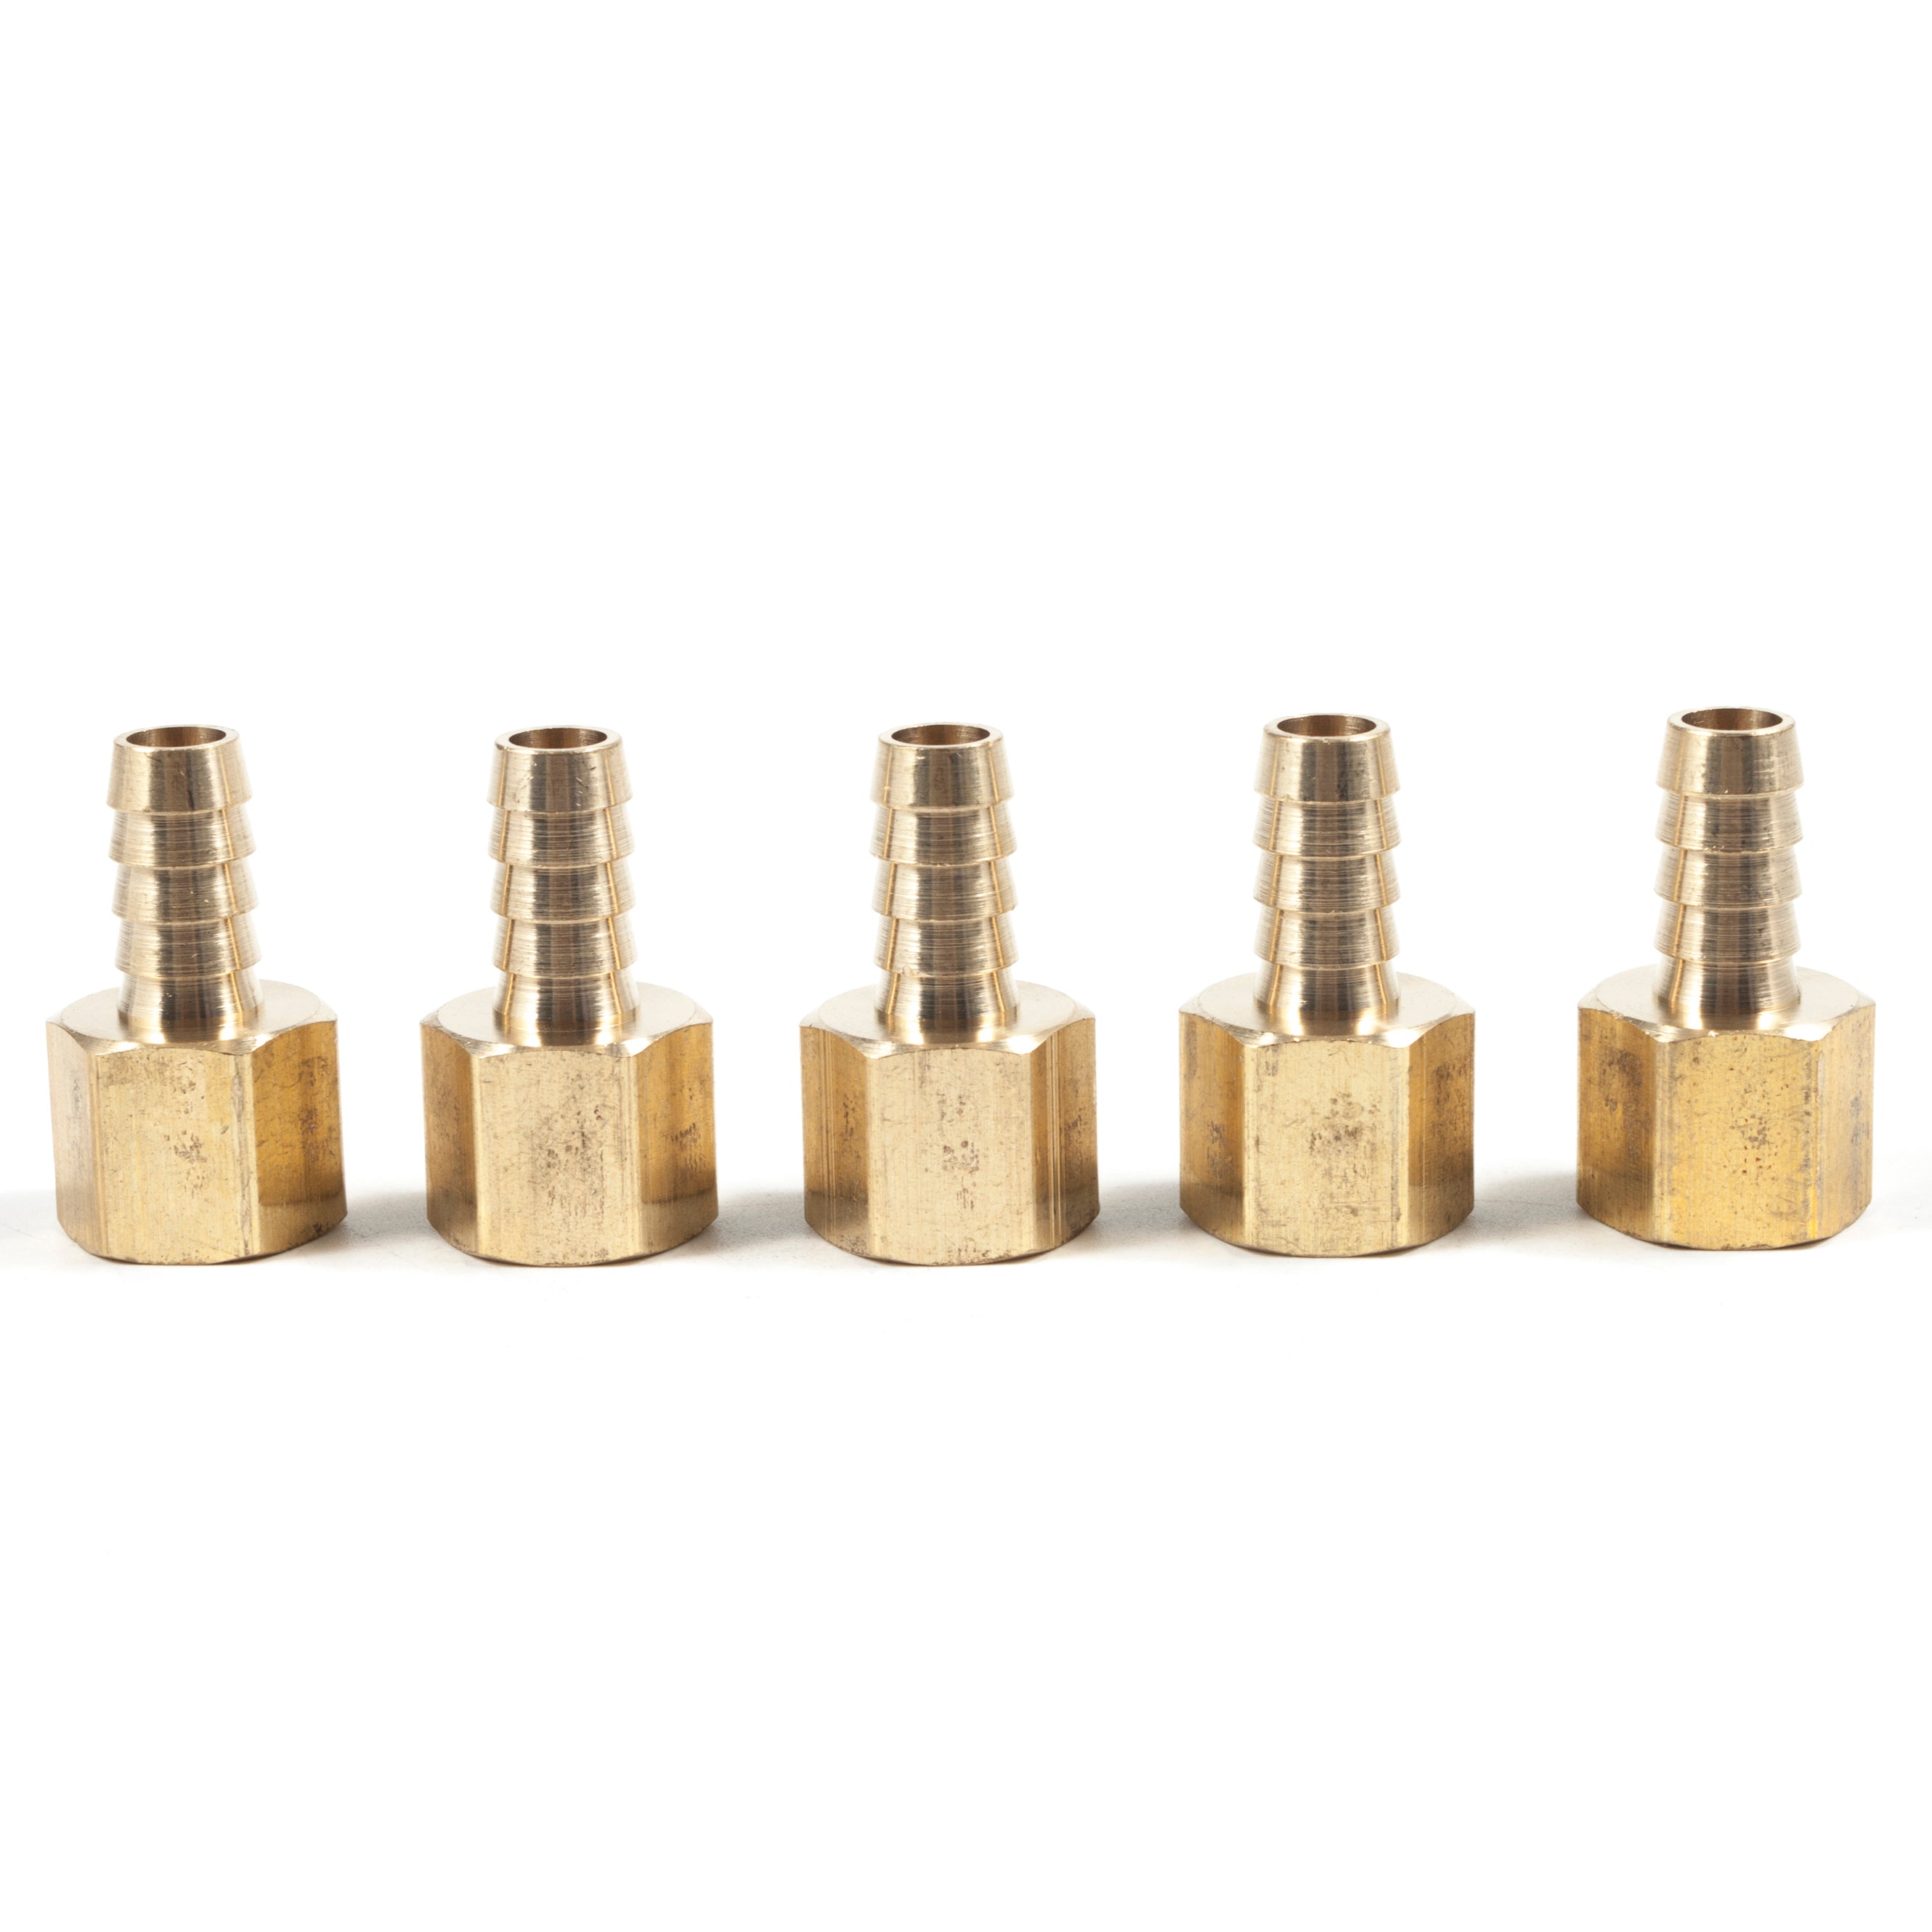 LTWFITTING Lead Free Brass Fitting Coupler/Adapter 3/8 Inch Hose Barb x 3/8 Inch Female NPT Fuel Gas Water (Pack of 5)